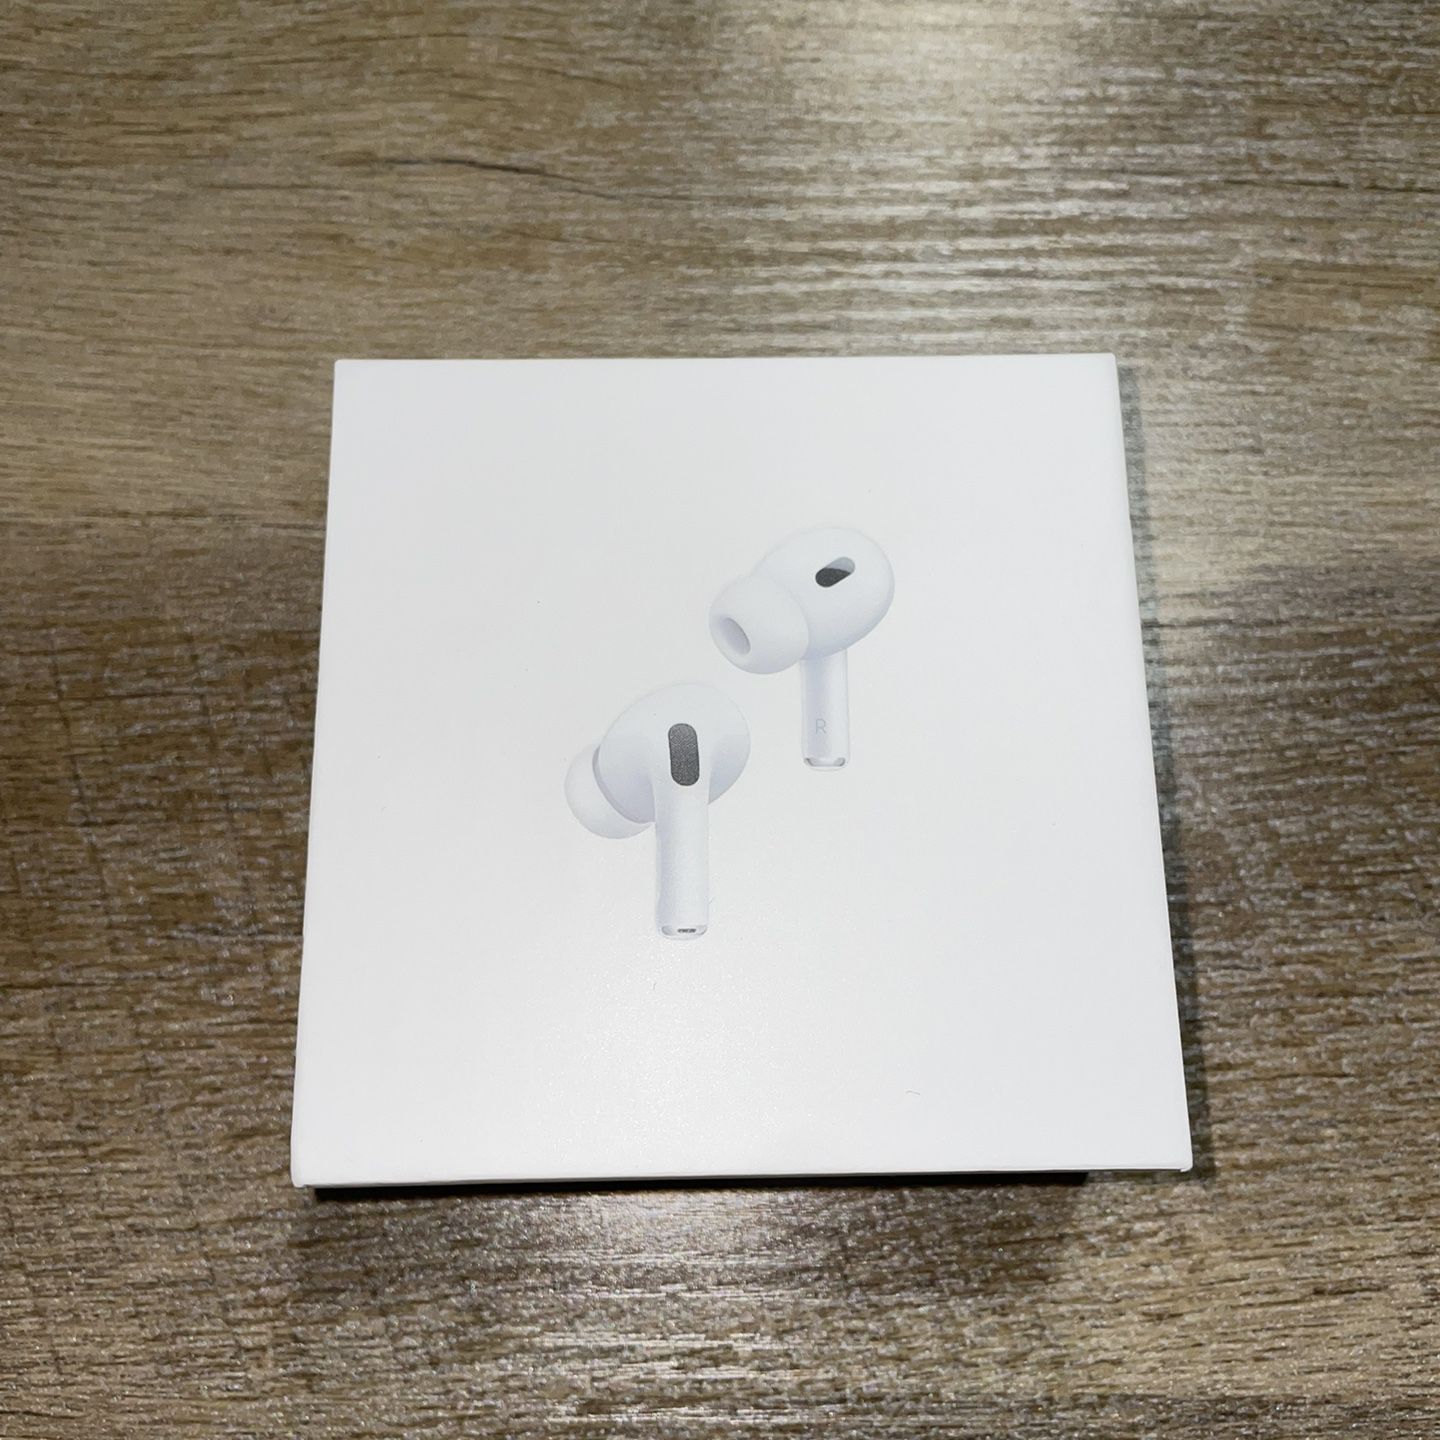 AirPods Pro 2 For Sale